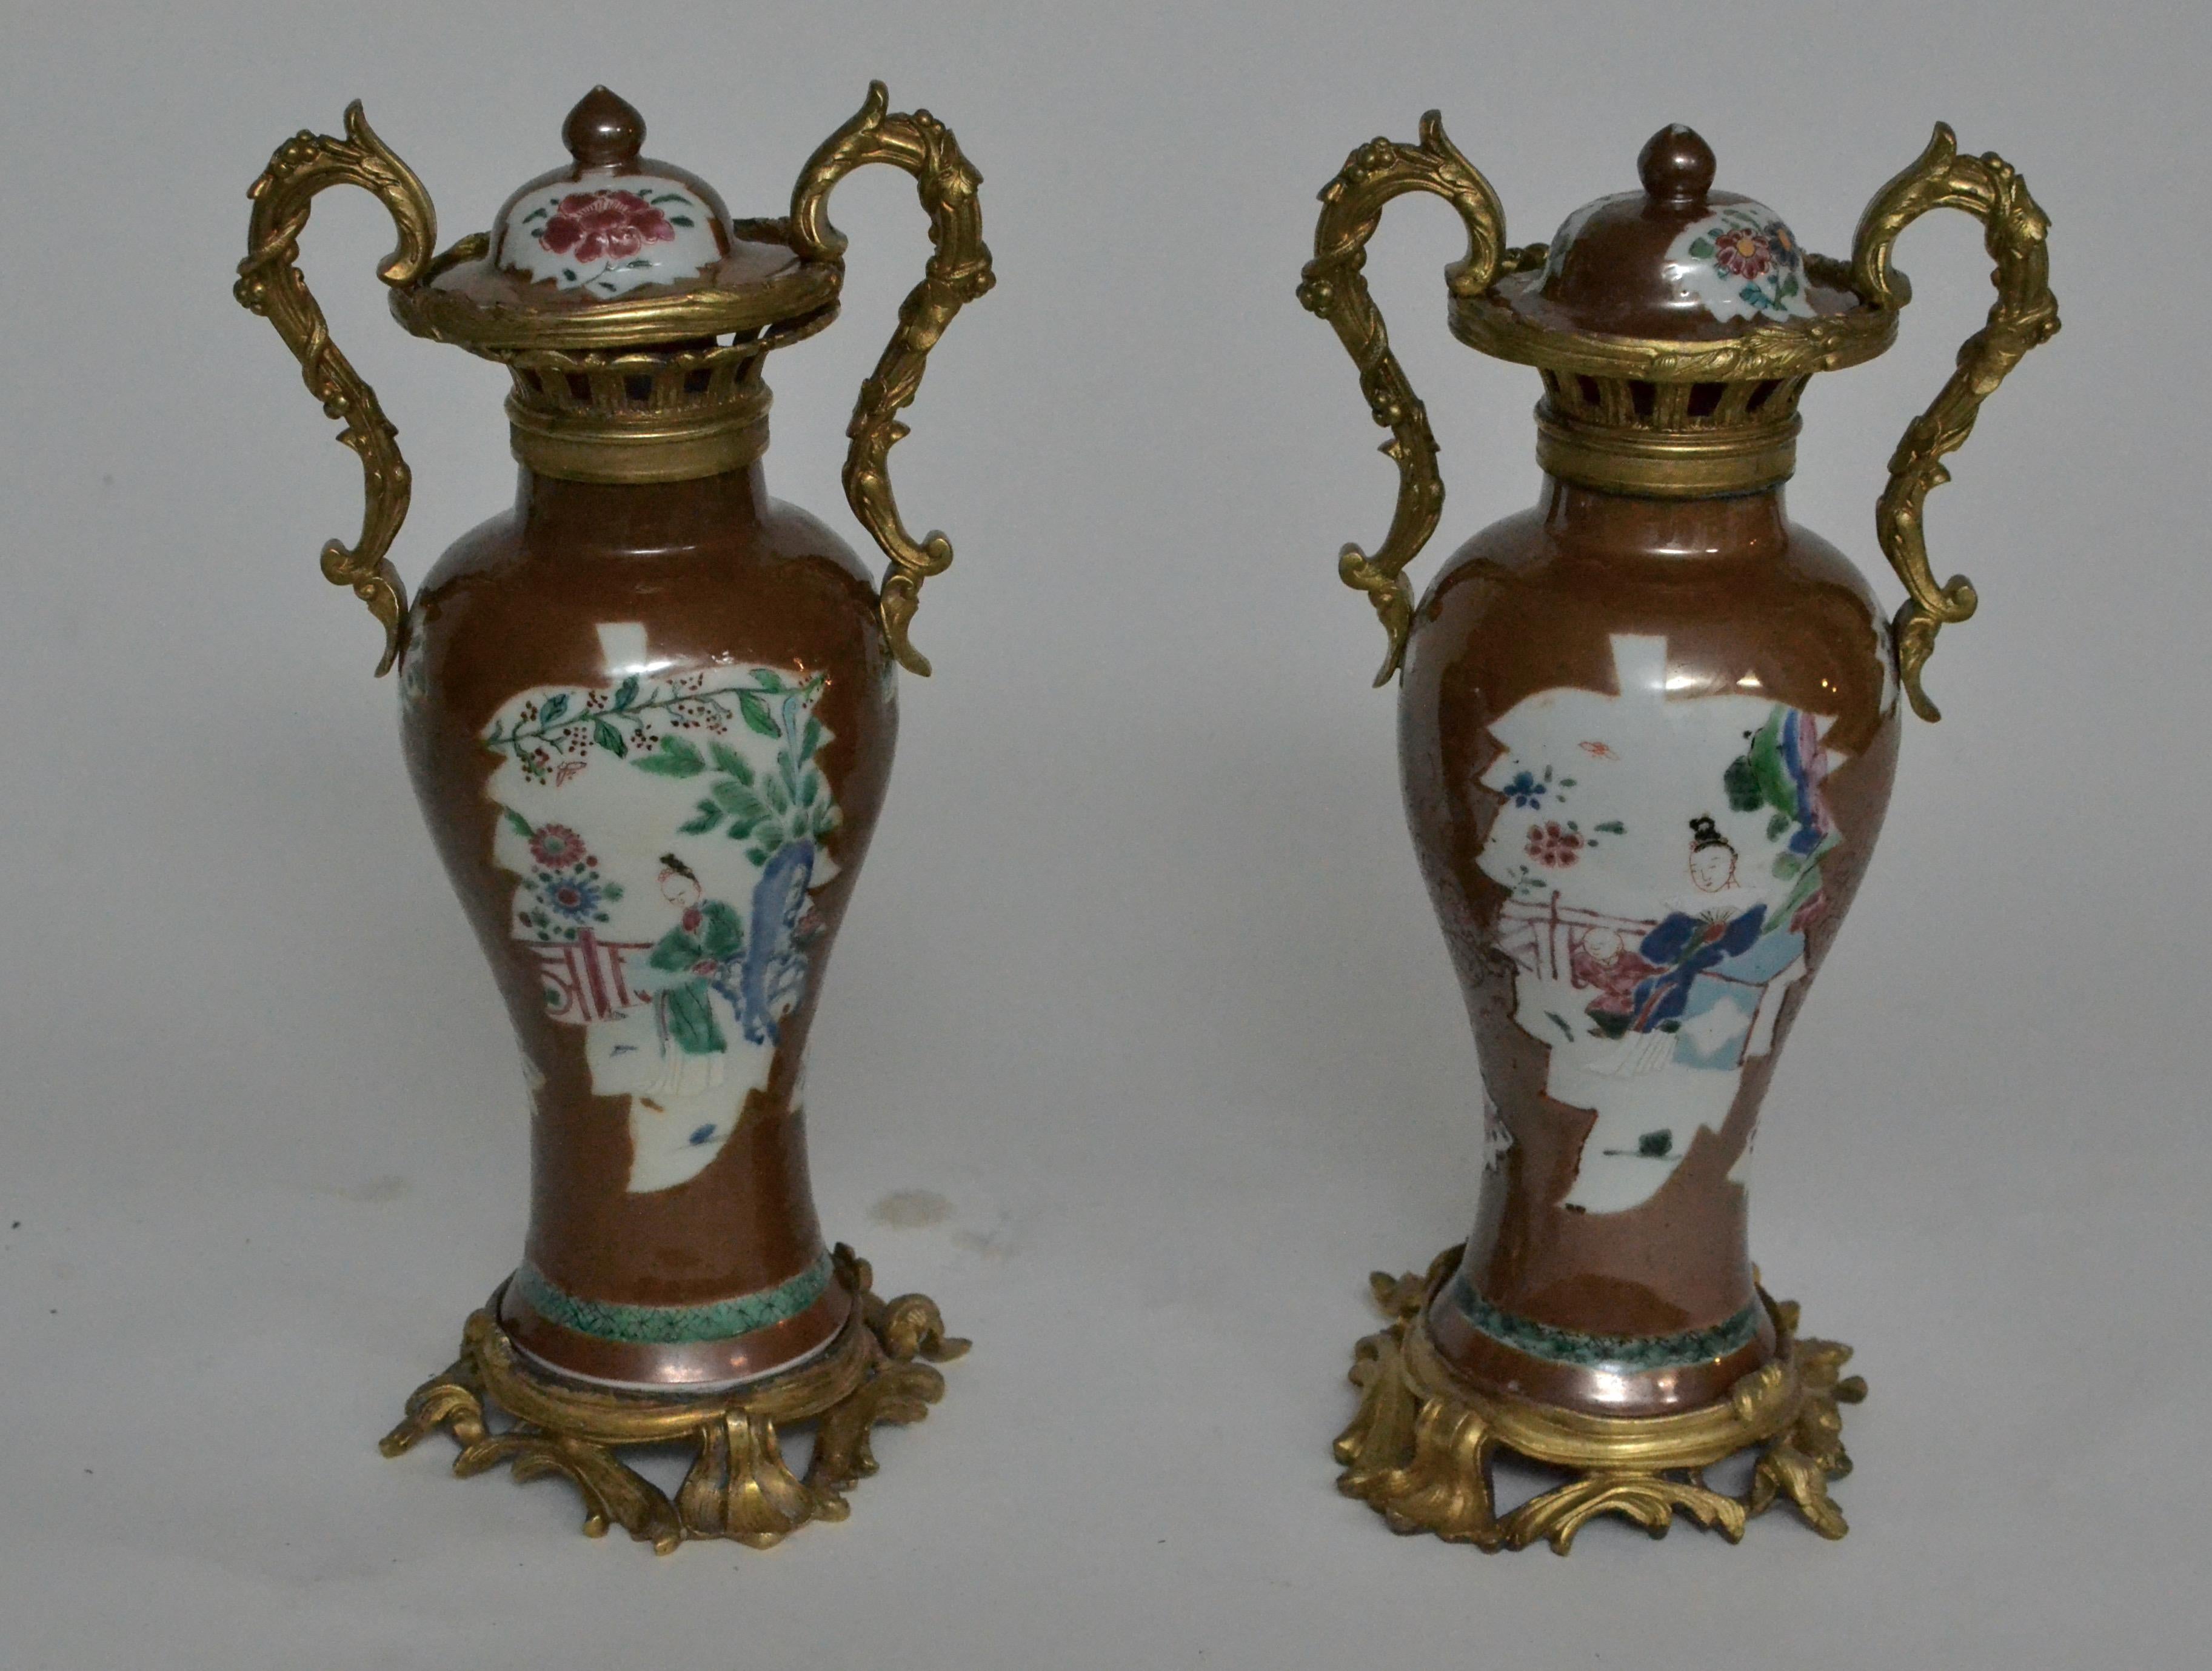 Pair of Chinese Ormolu Mounted Porcelain Vases, 18th Century 1